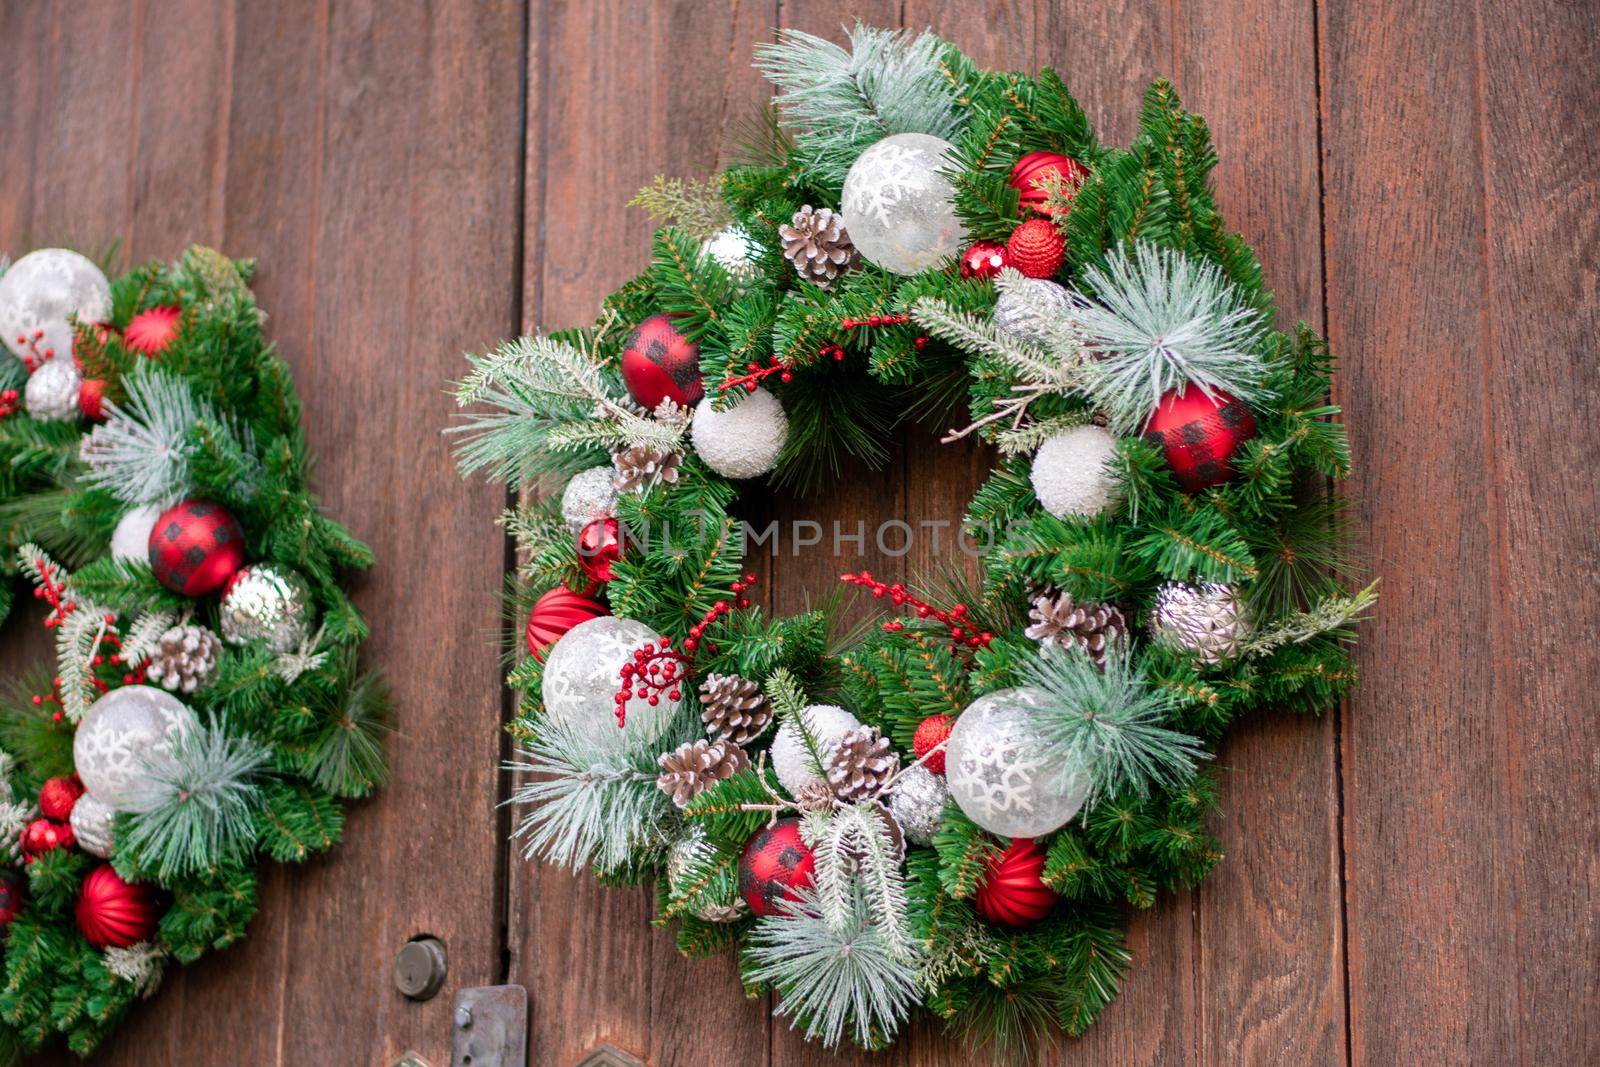 A Christmas Wreath on a Wooden Door by bju12290